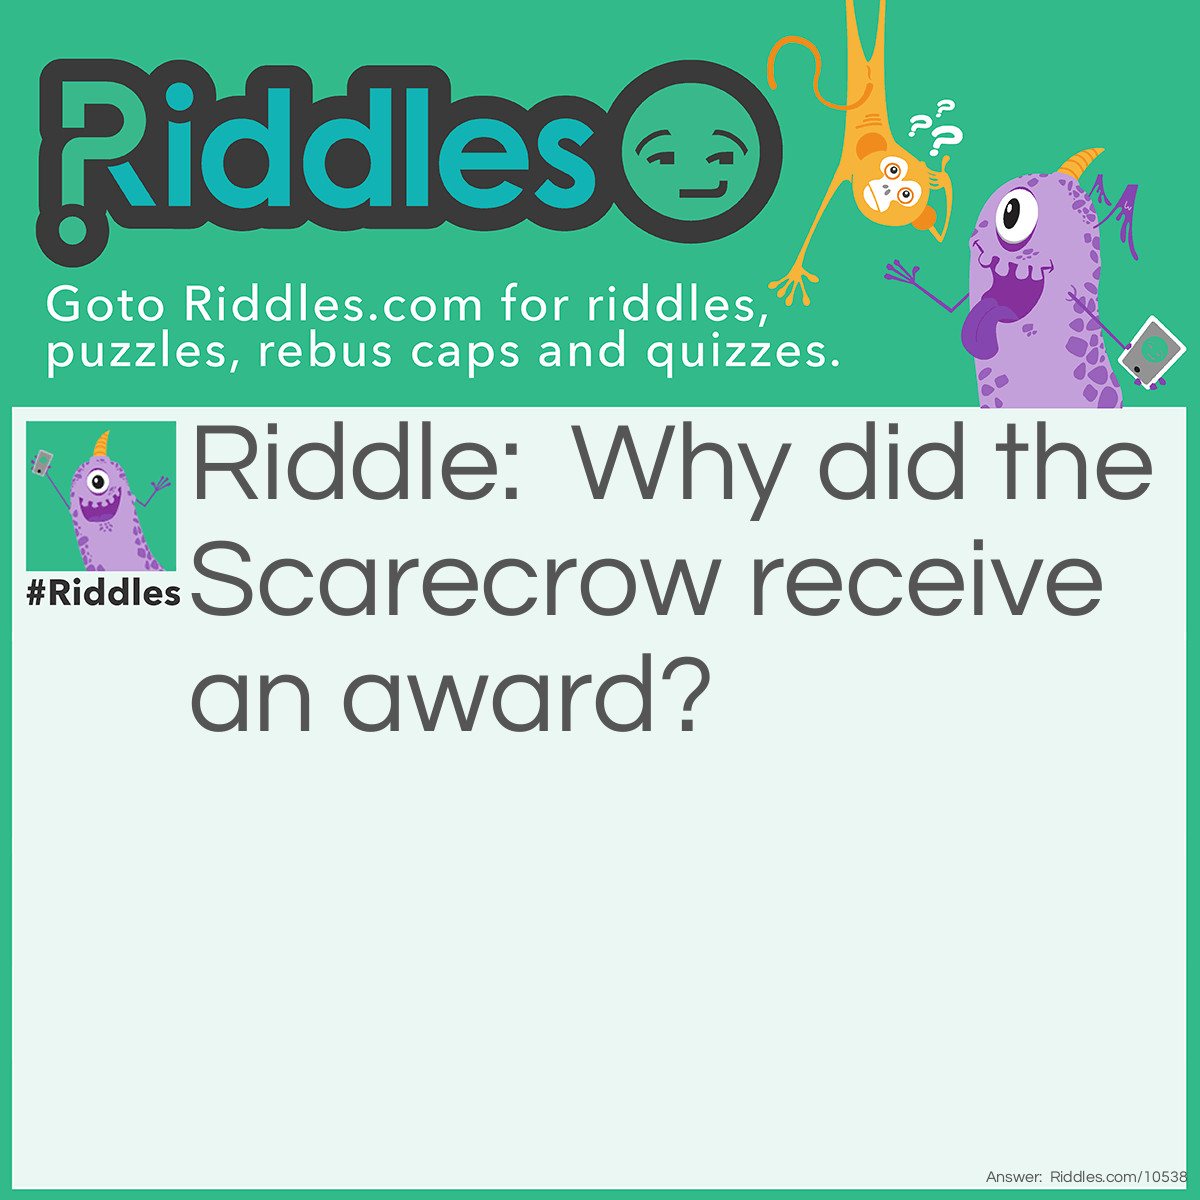 Riddle: Why did the Scarecrow receive an award? Answer: He was outstanding in his field.